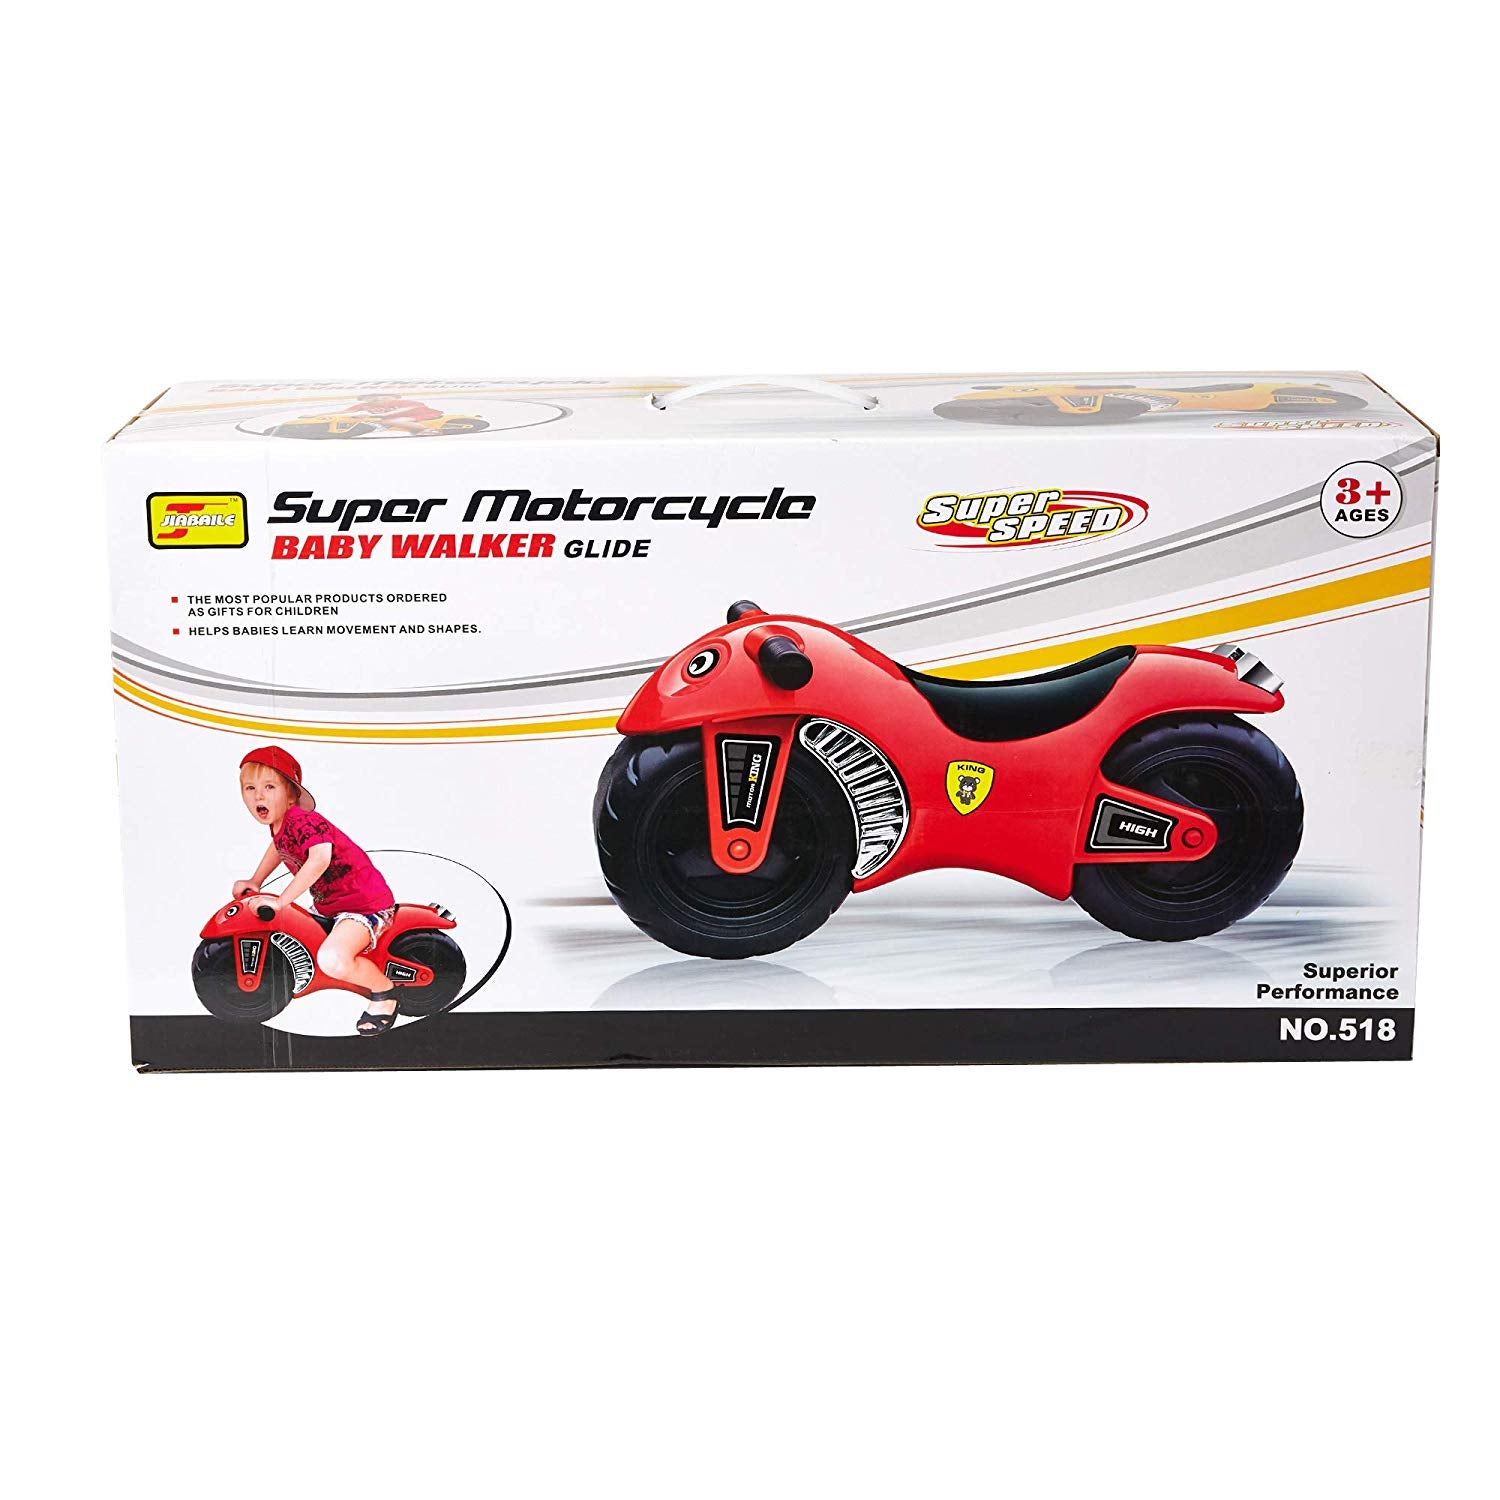 Bosonshop Ride On Motorcycle, Durable & Easy to Ride Toddler Bike, Red